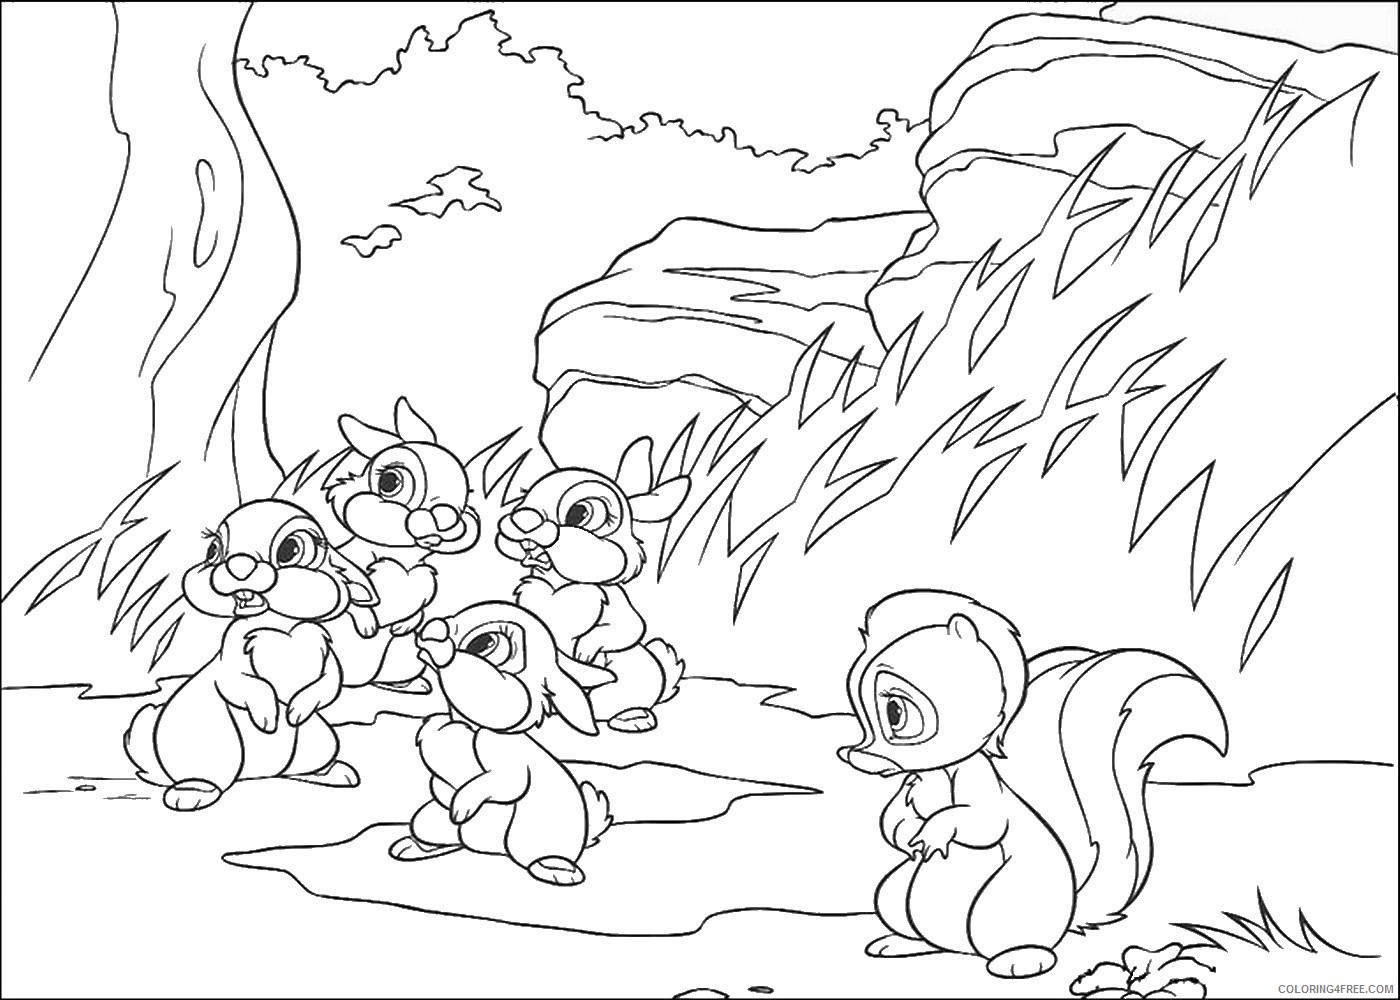 Bambi Coloring Pages Cartoons bambi_cl_12 Printable 2020 0938 Coloring4free